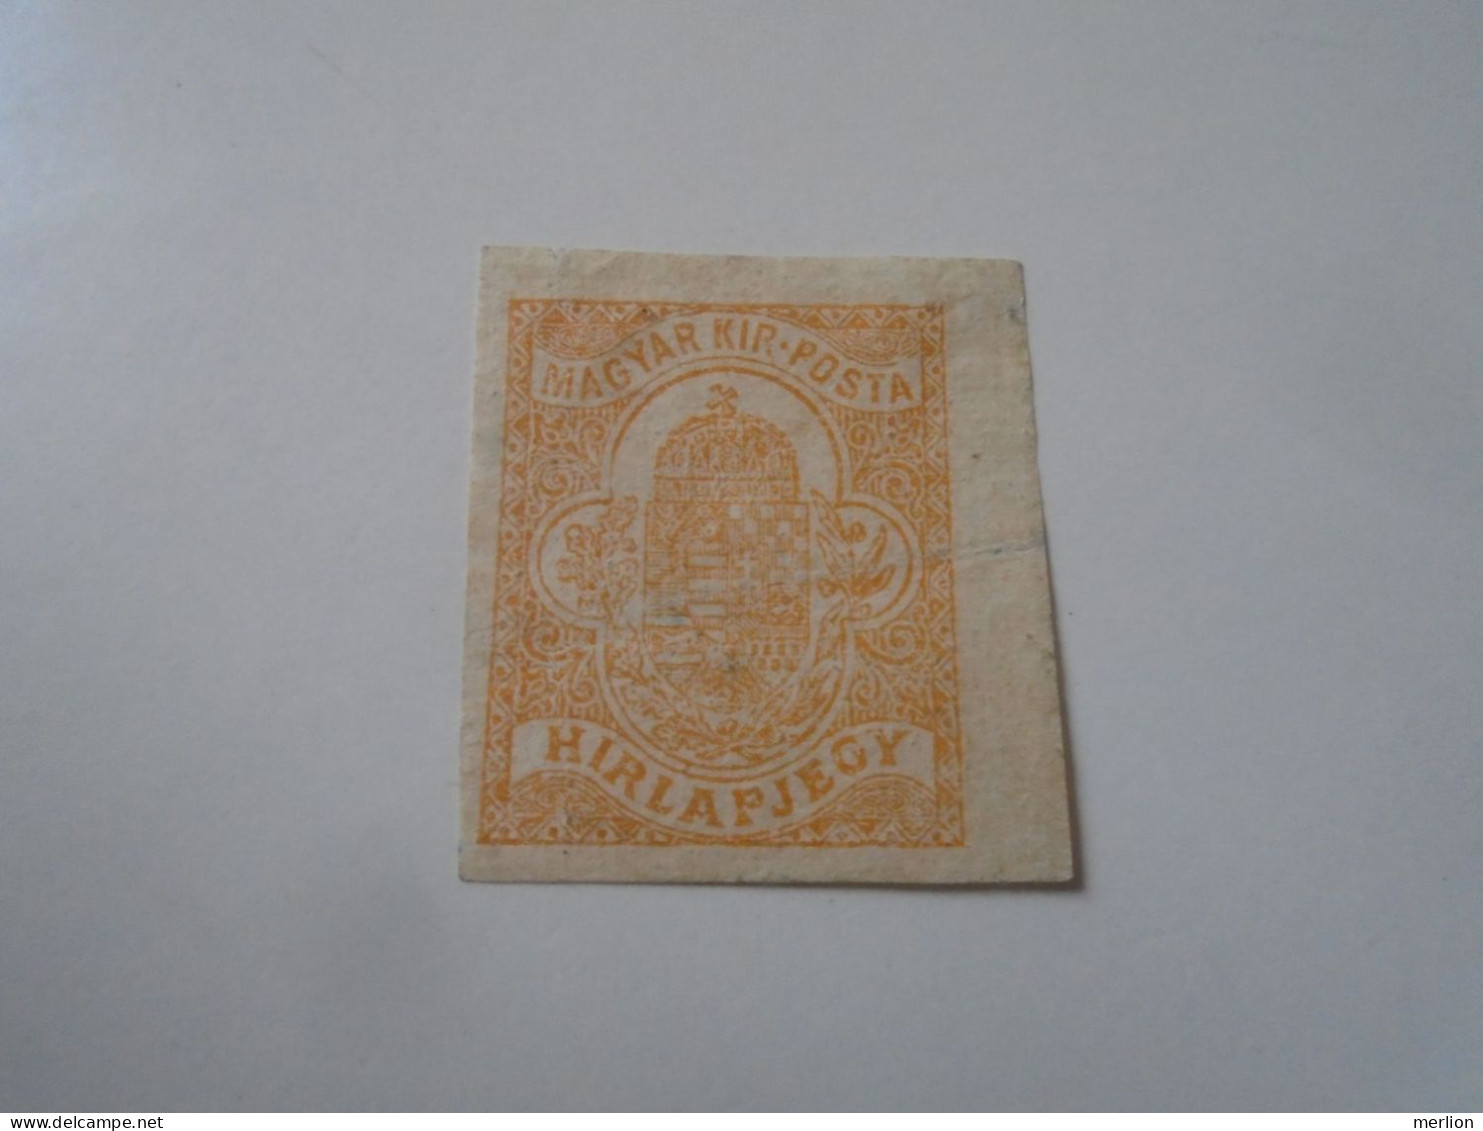 D195525   Hungary - Newspaper   Tax Stamp  Ca 1900  - Hírlapjegy - Newspapers